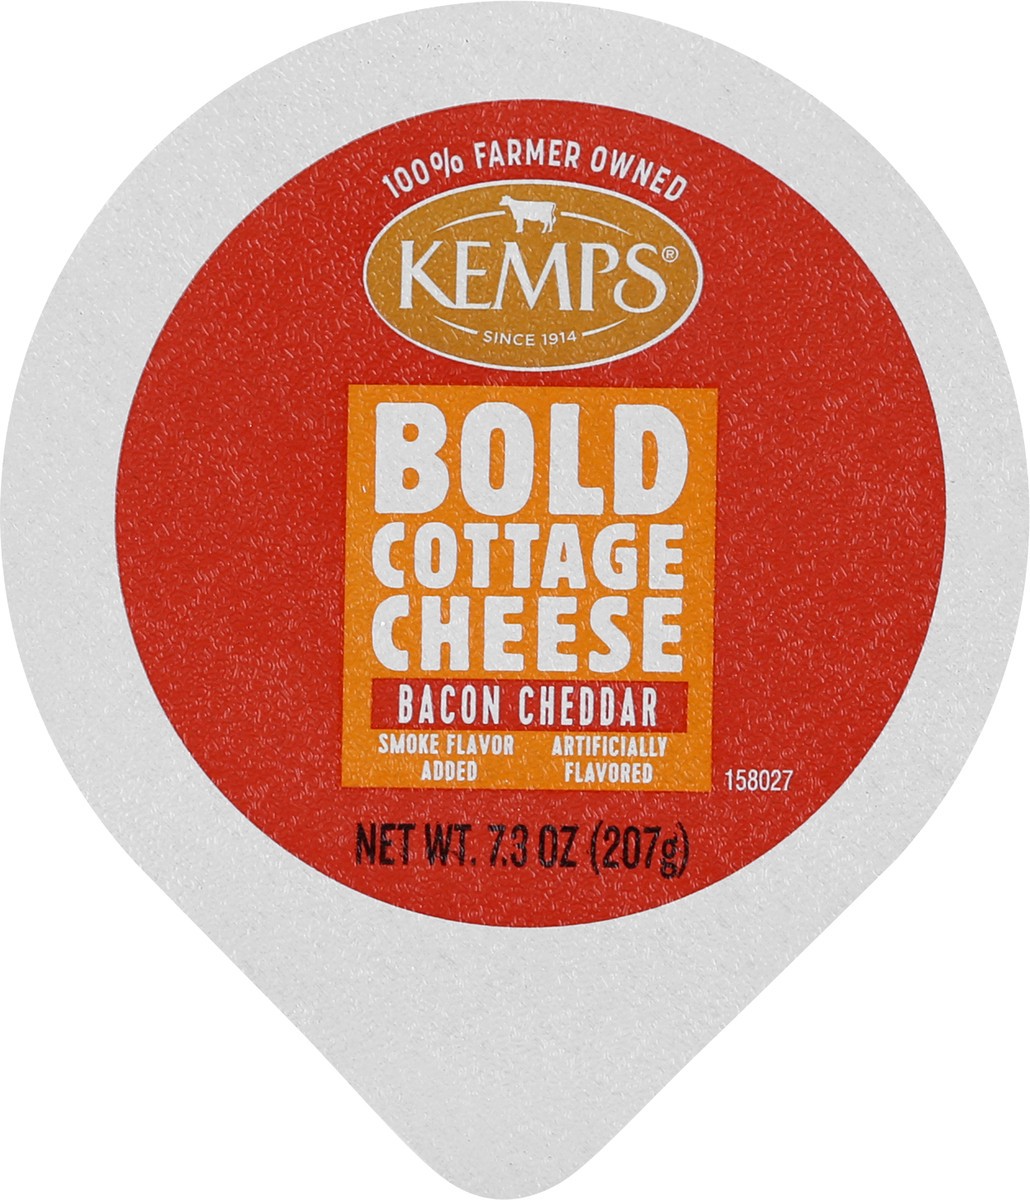 slide 13 of 13, Kemps Small Curd 4% Milkfat Min Bold Bacon Cheddar Cottage Cheese 7.3 oz, 7.3 oz